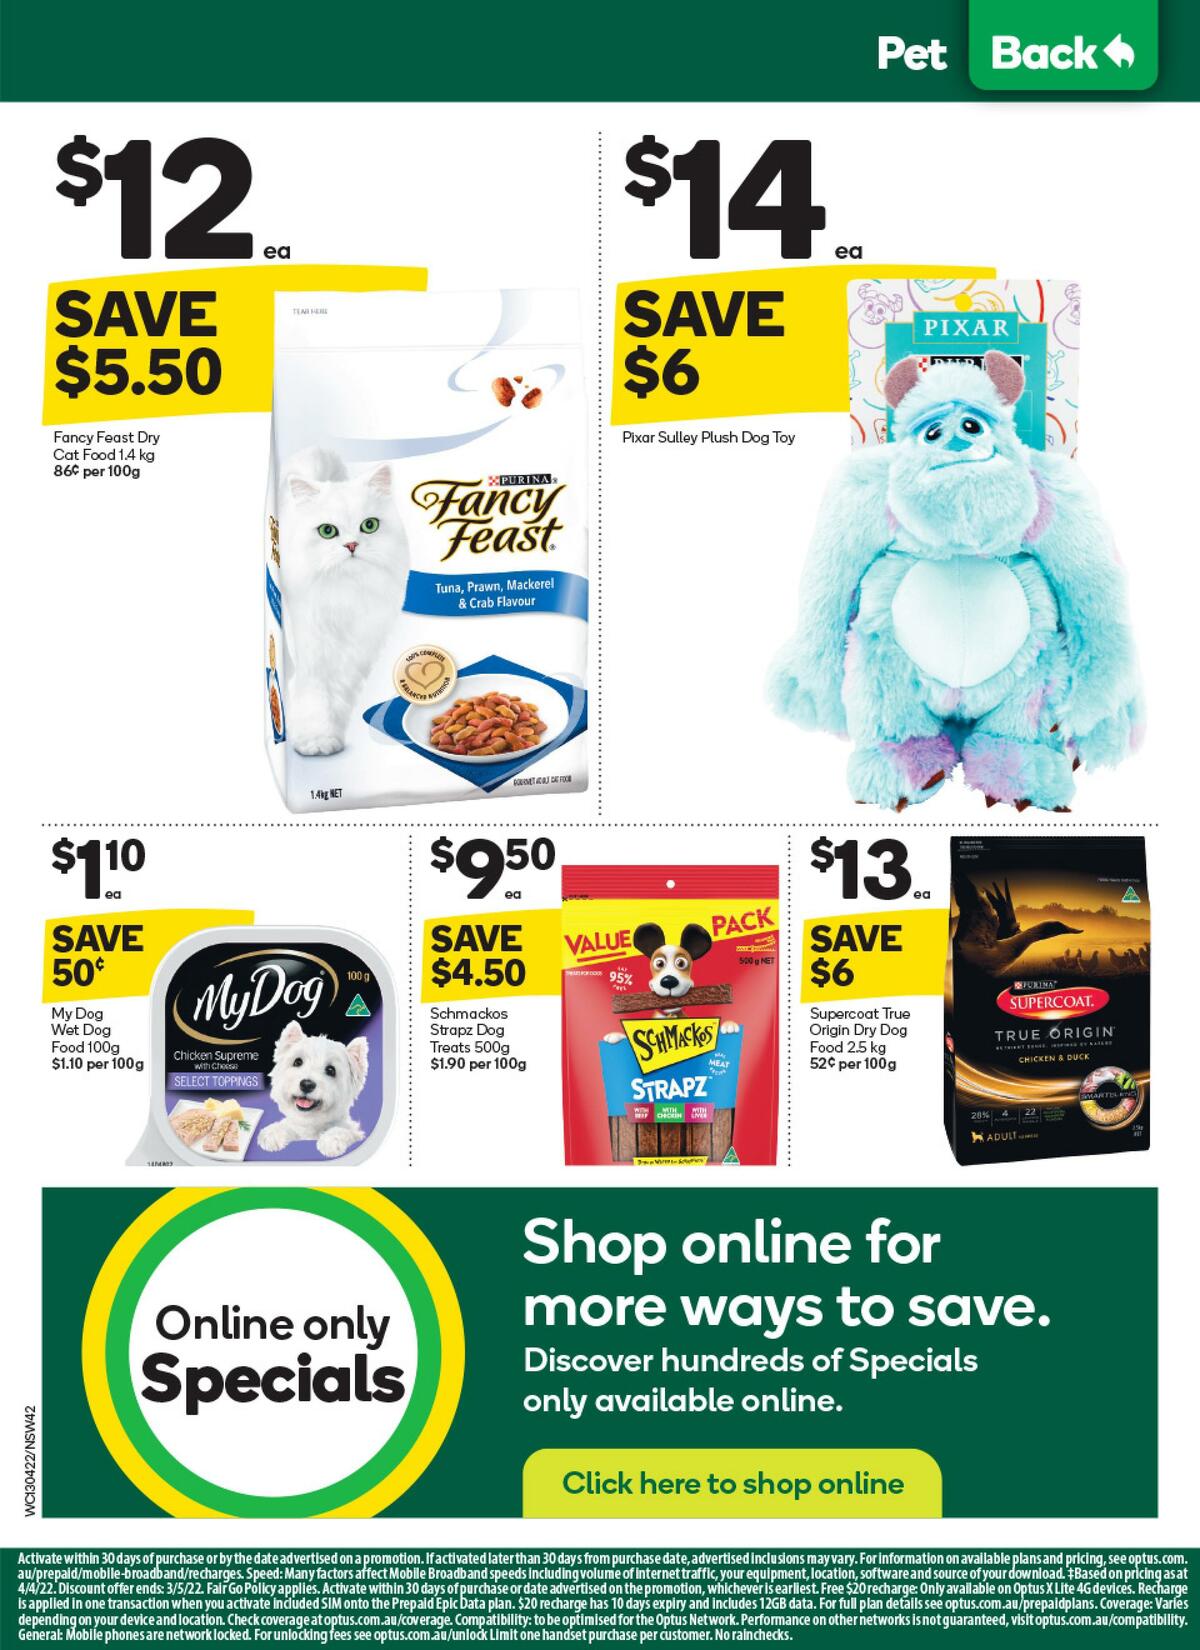 Woolworths Catalogues from 13 April